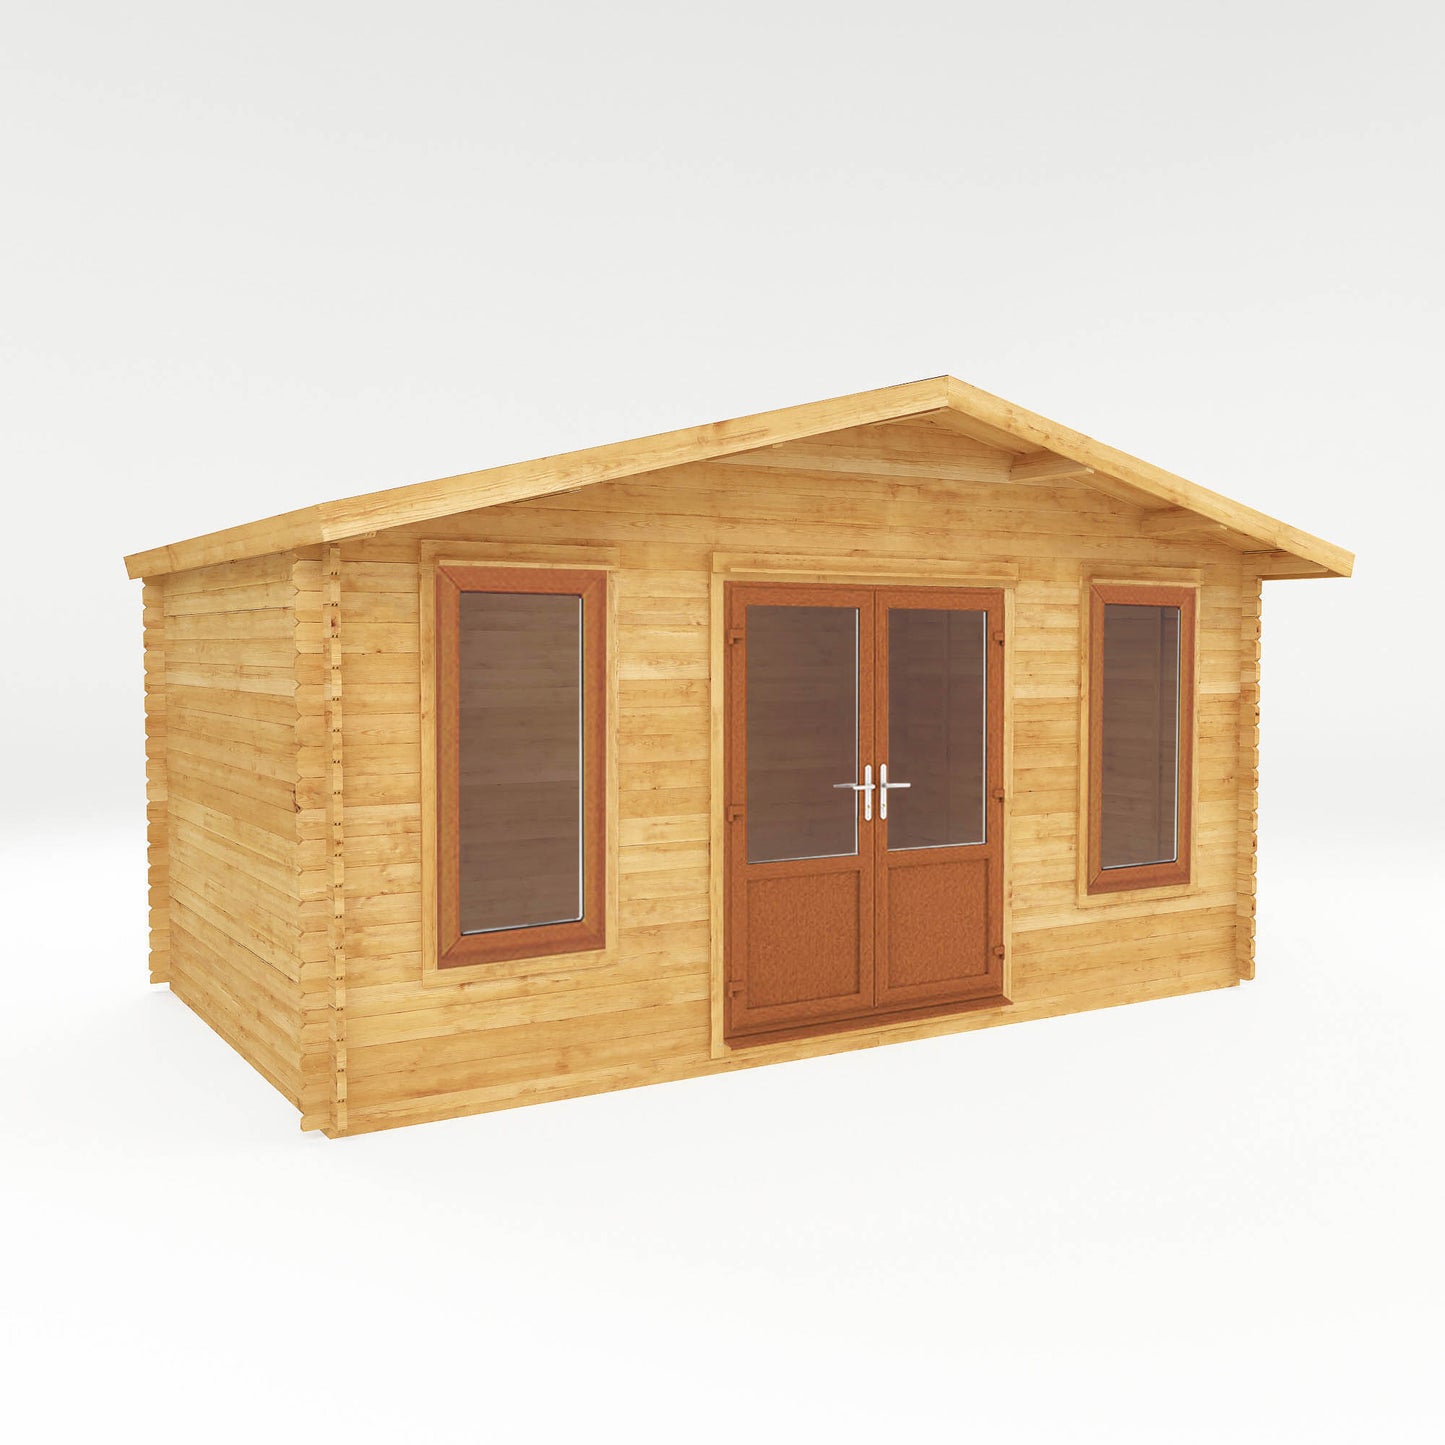 The 5m x 3m Sparrow Log Cabin with Oak UPVC